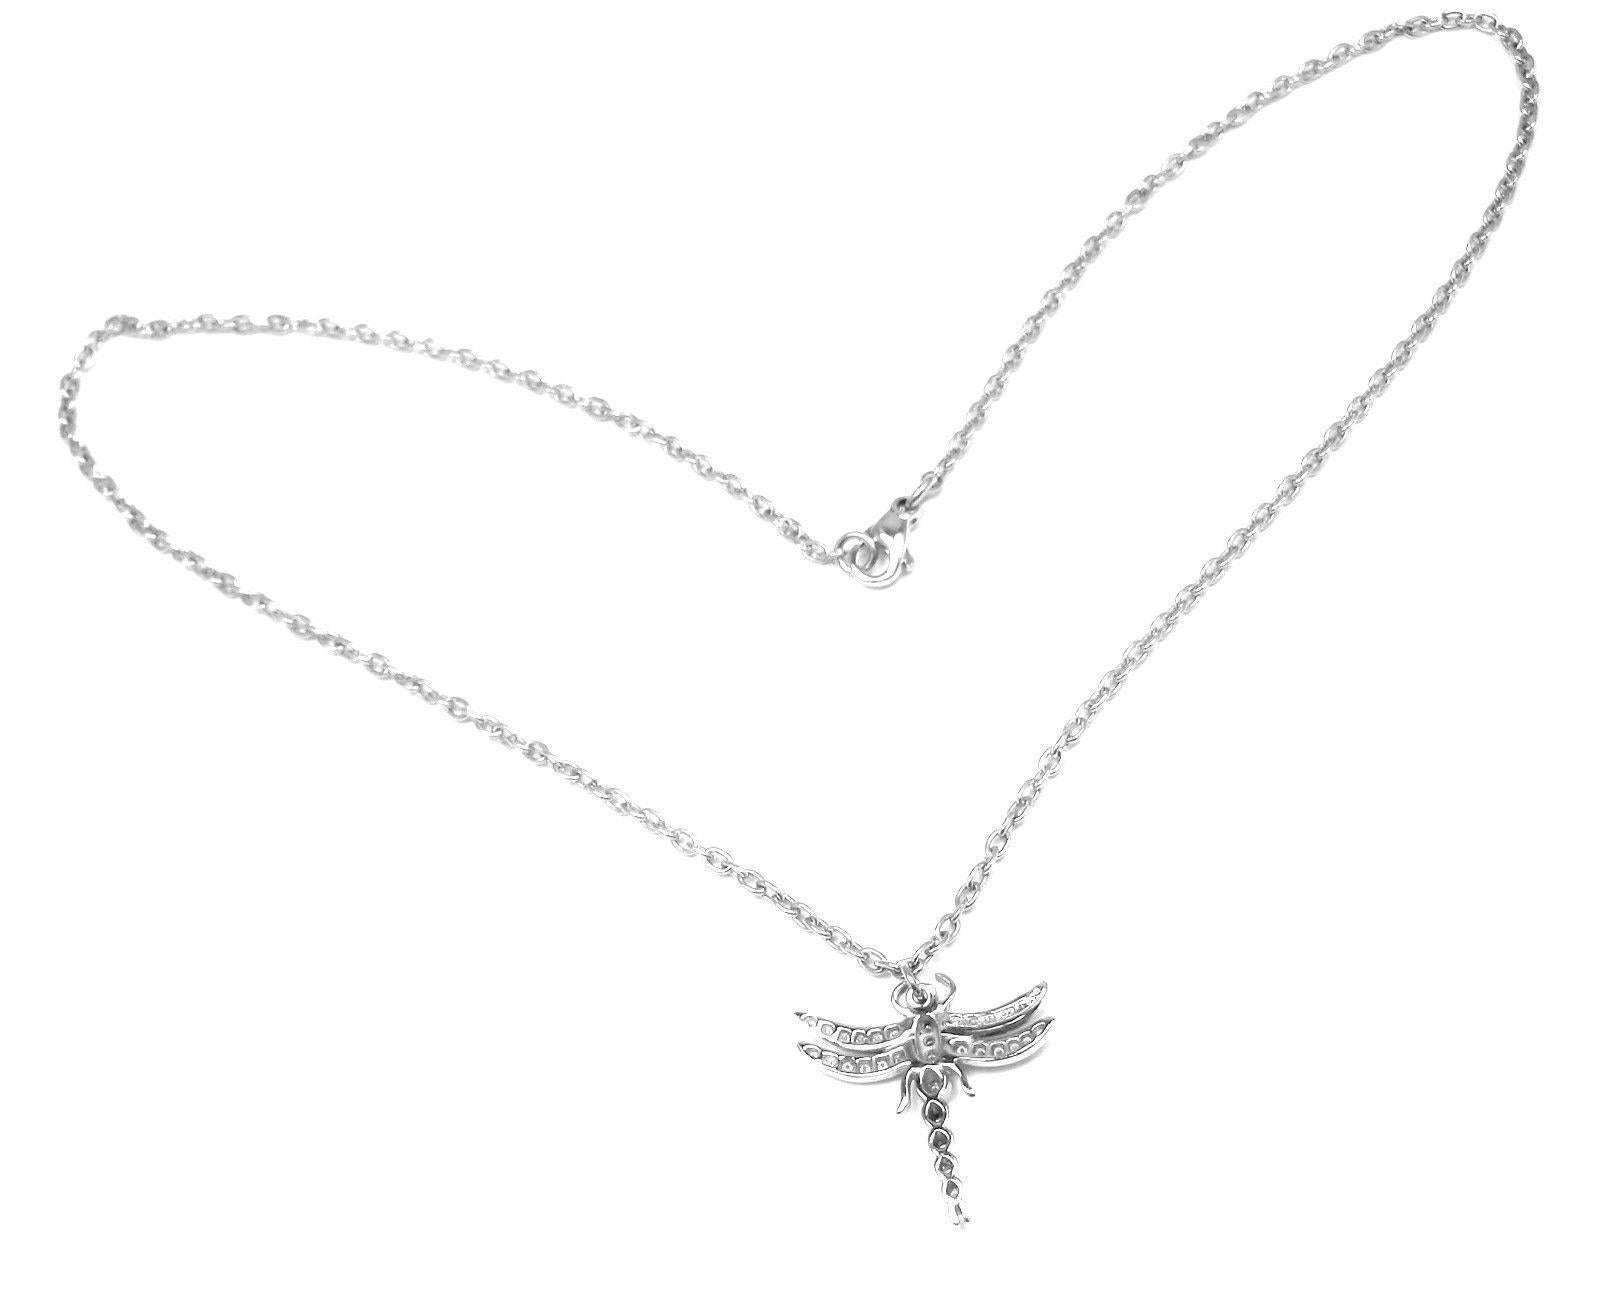 Platinum Diamond Dragonfly Pendant Necklace by Tiffany & Co. 
With 32 round brilliant cut diamonds VS1 clarity, G color total weight approx. .17ct
This necklace comes with Tiffany & Co box.


Details: 
Measurements: Necklace Length: 16